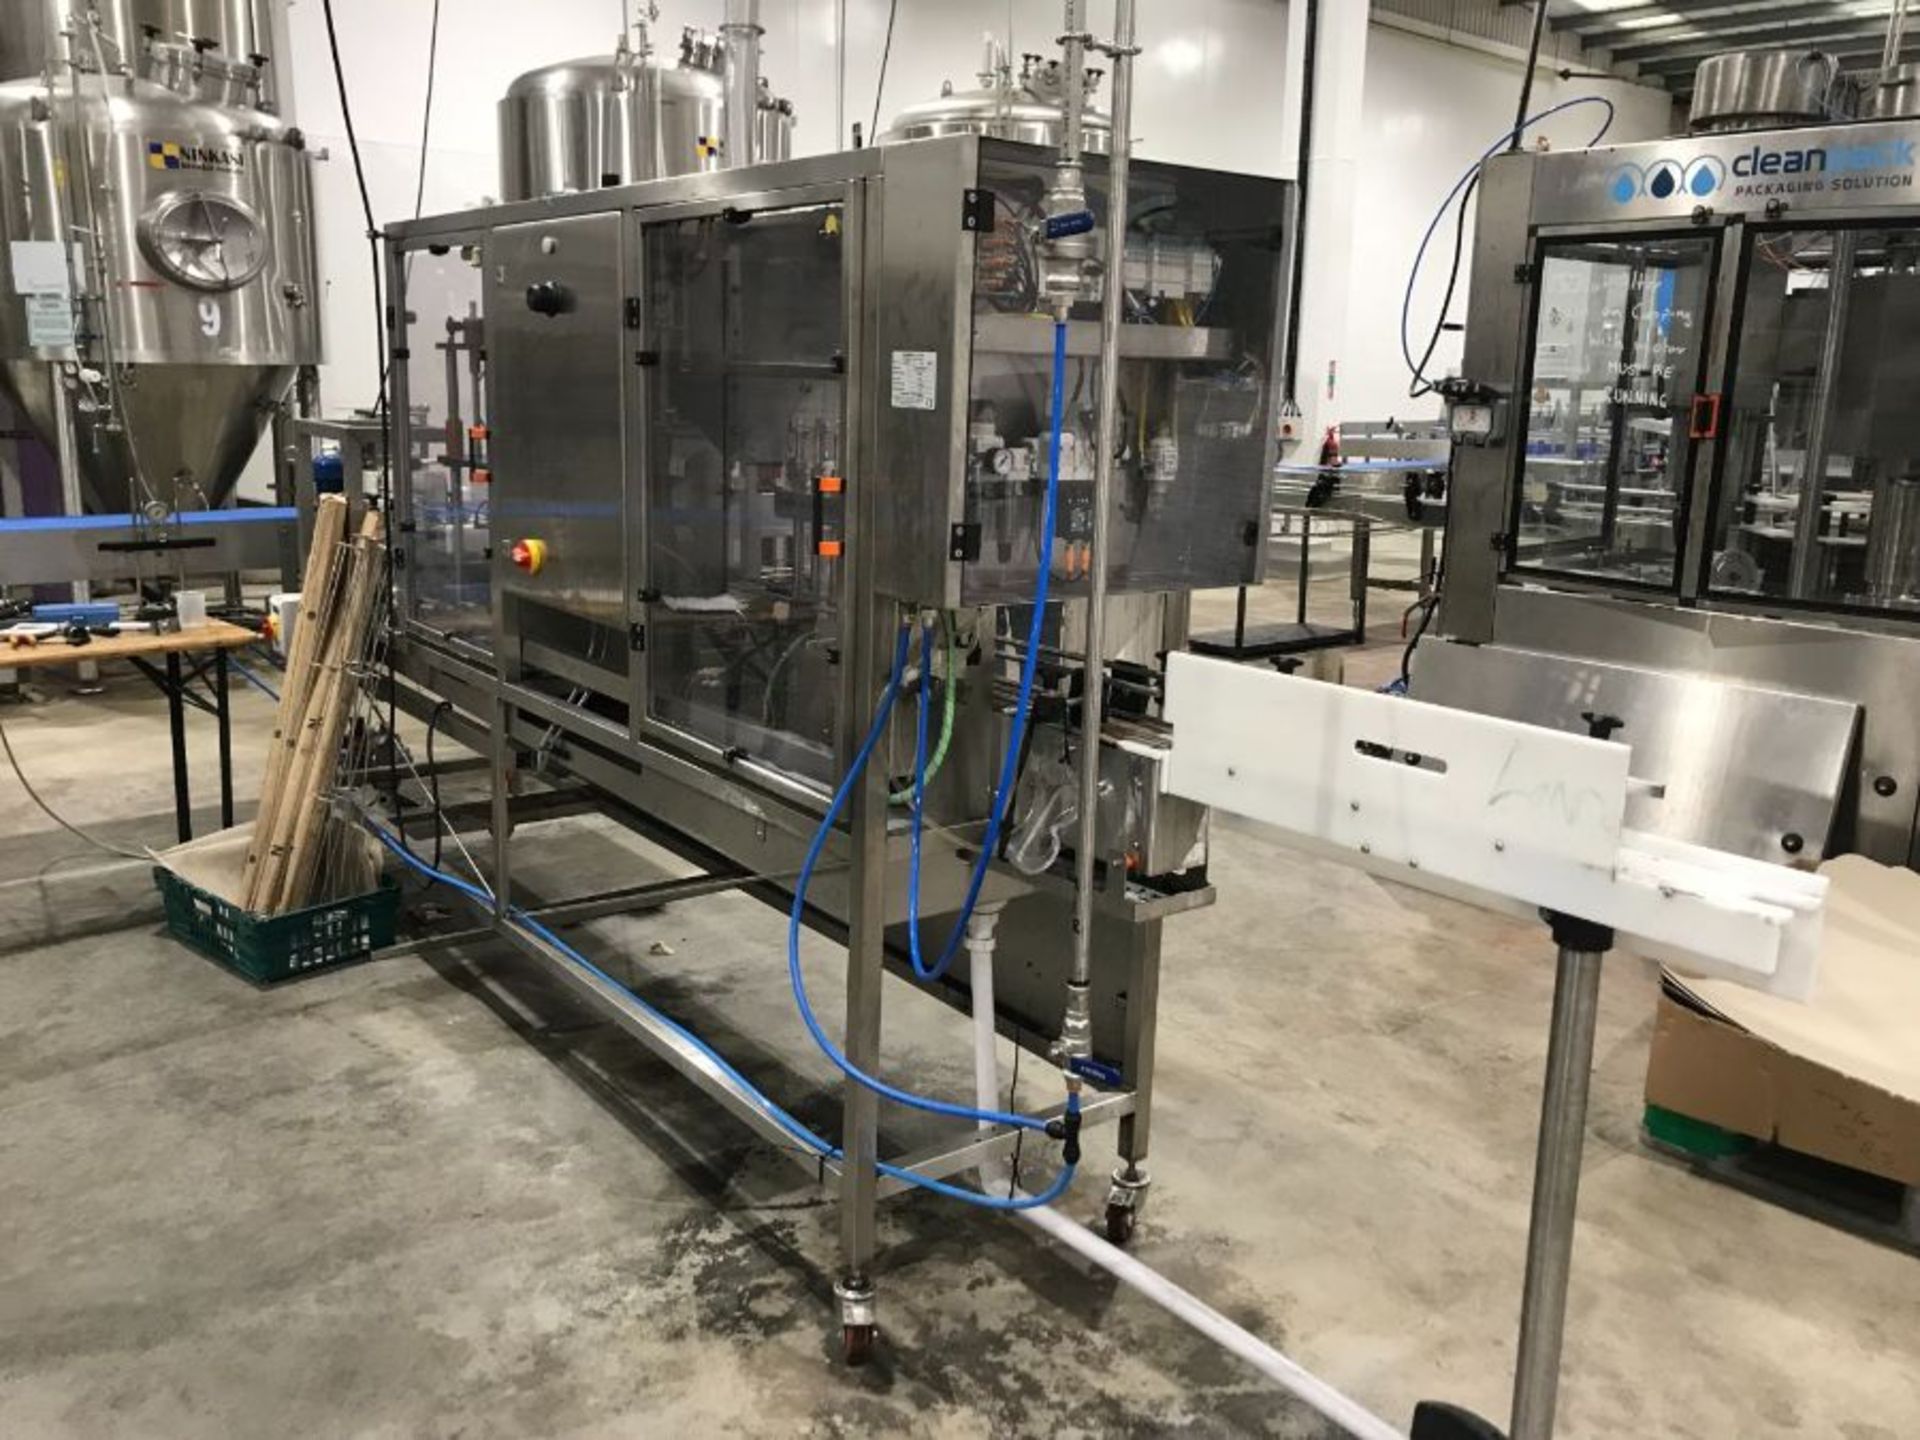 Micro Can Canning Machines CL5V3 linear can filling and seaming machine (2020) - Image 8 of 10